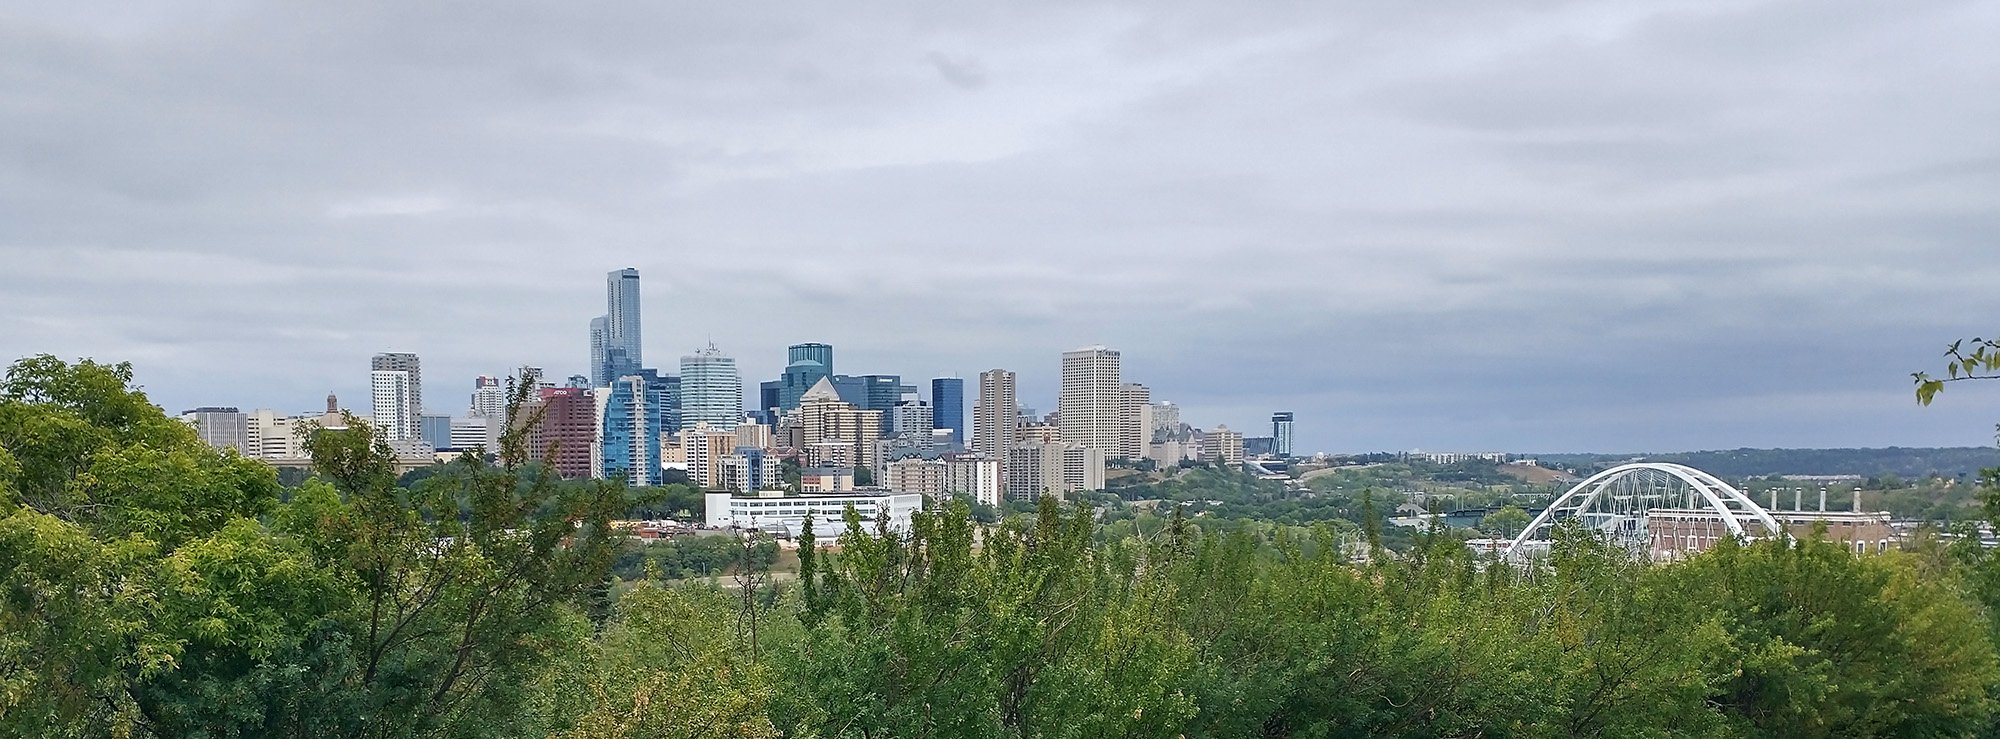 Edmonton really looks like a rough place to live honestly. 